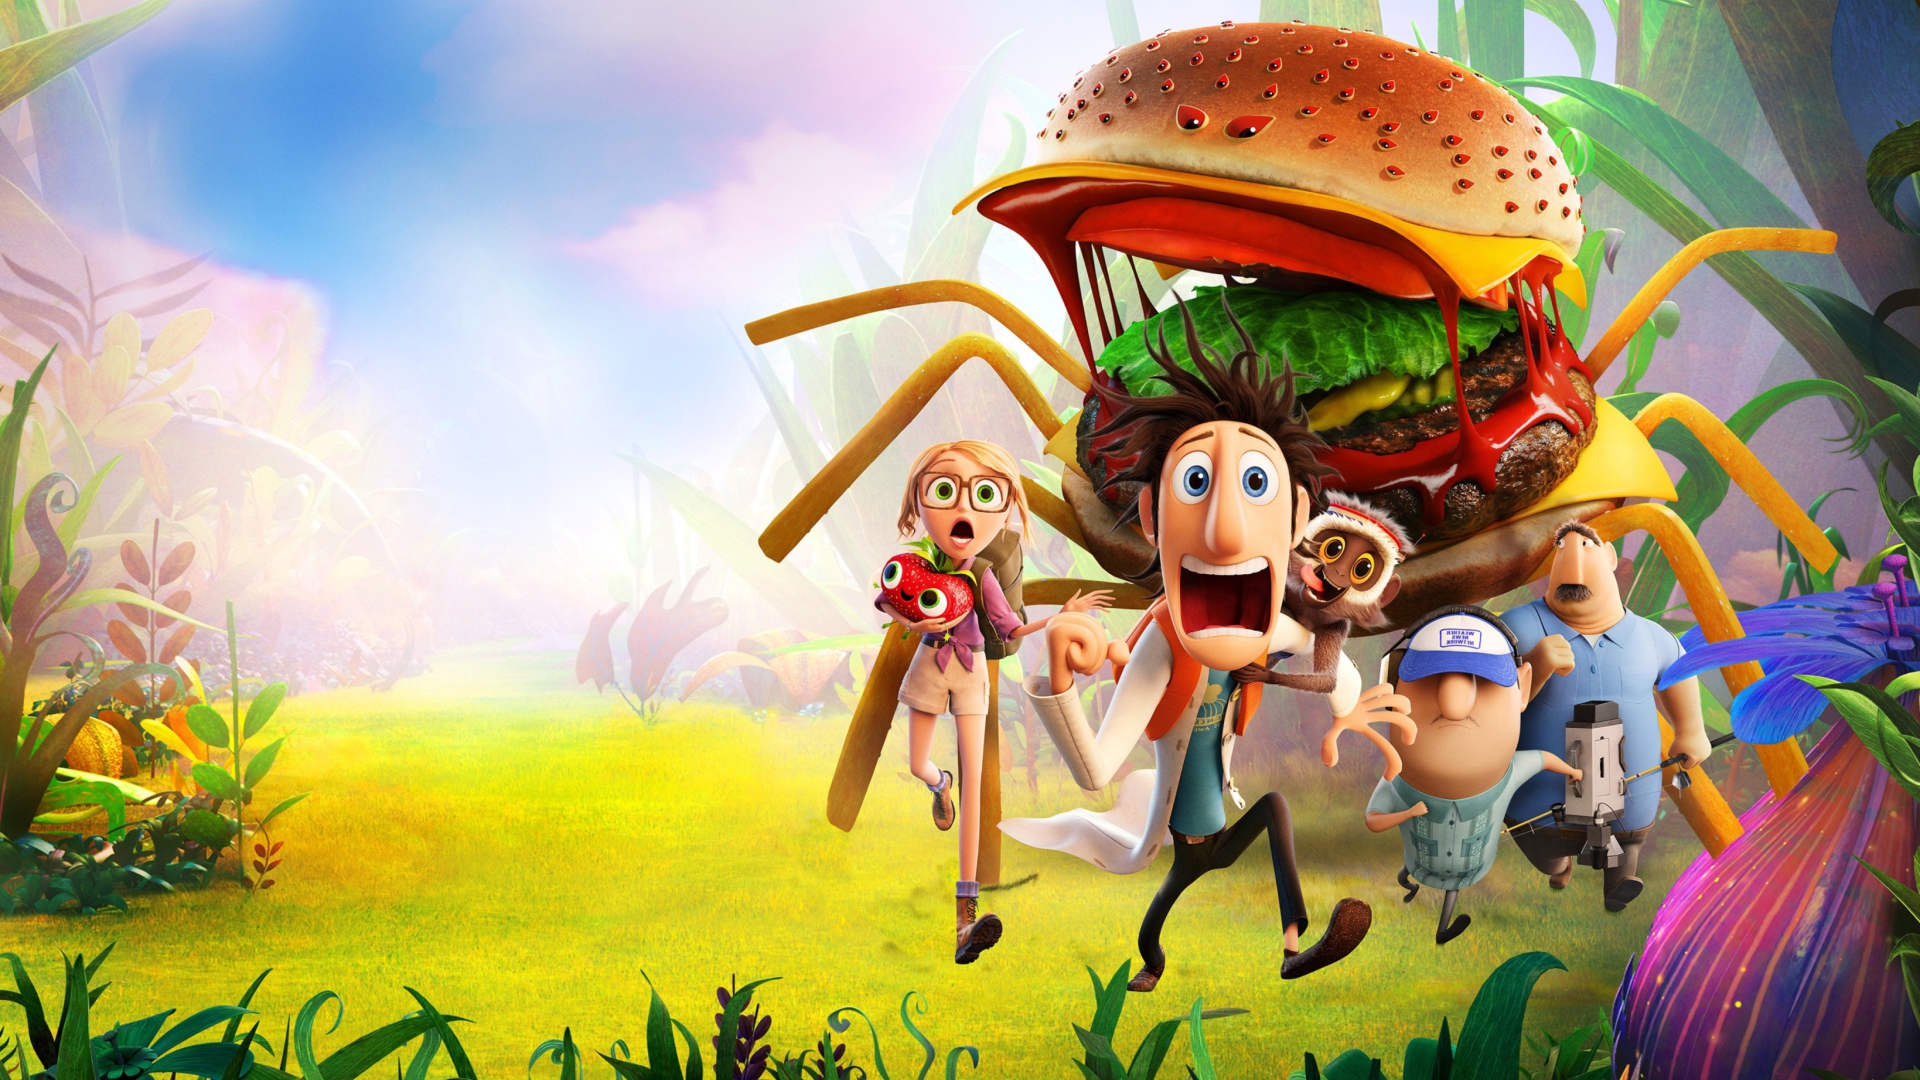 Sfondi Cloudy With A Chance Of Meatballs 1920x1080